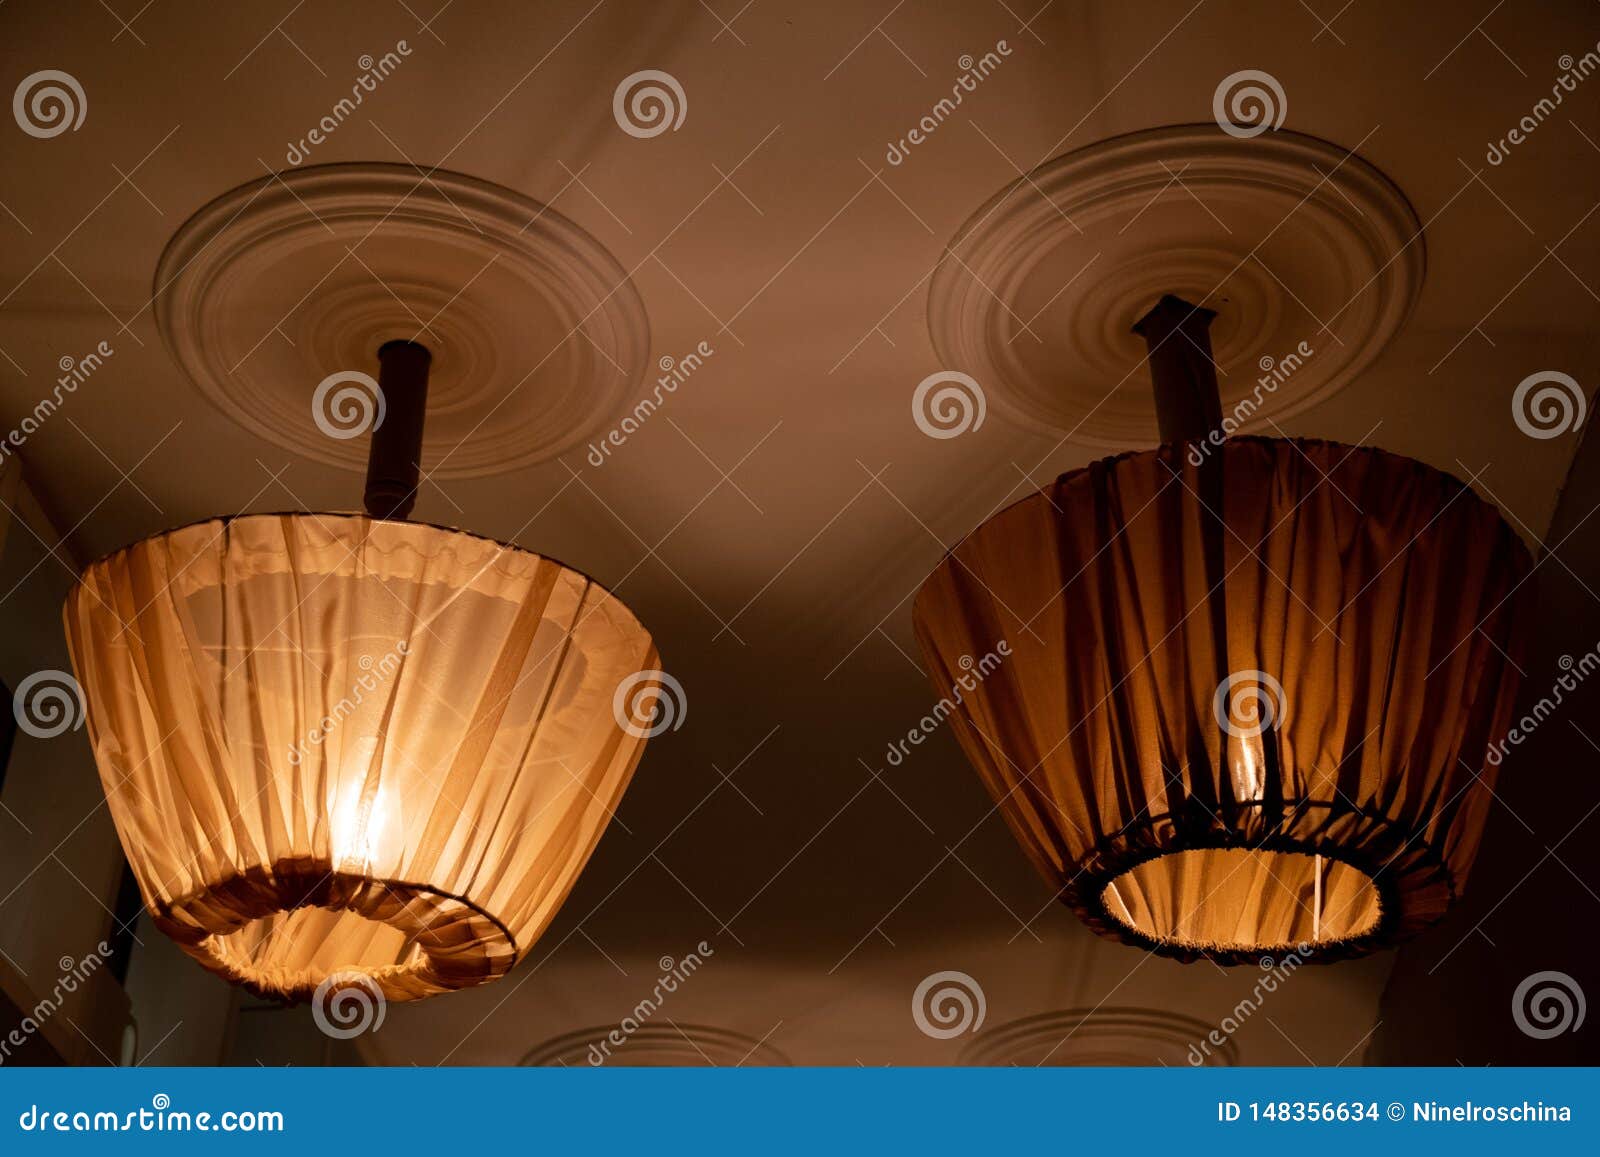 Two Ceiling Lamps With Retro Style Lampshades Draped With Tulle